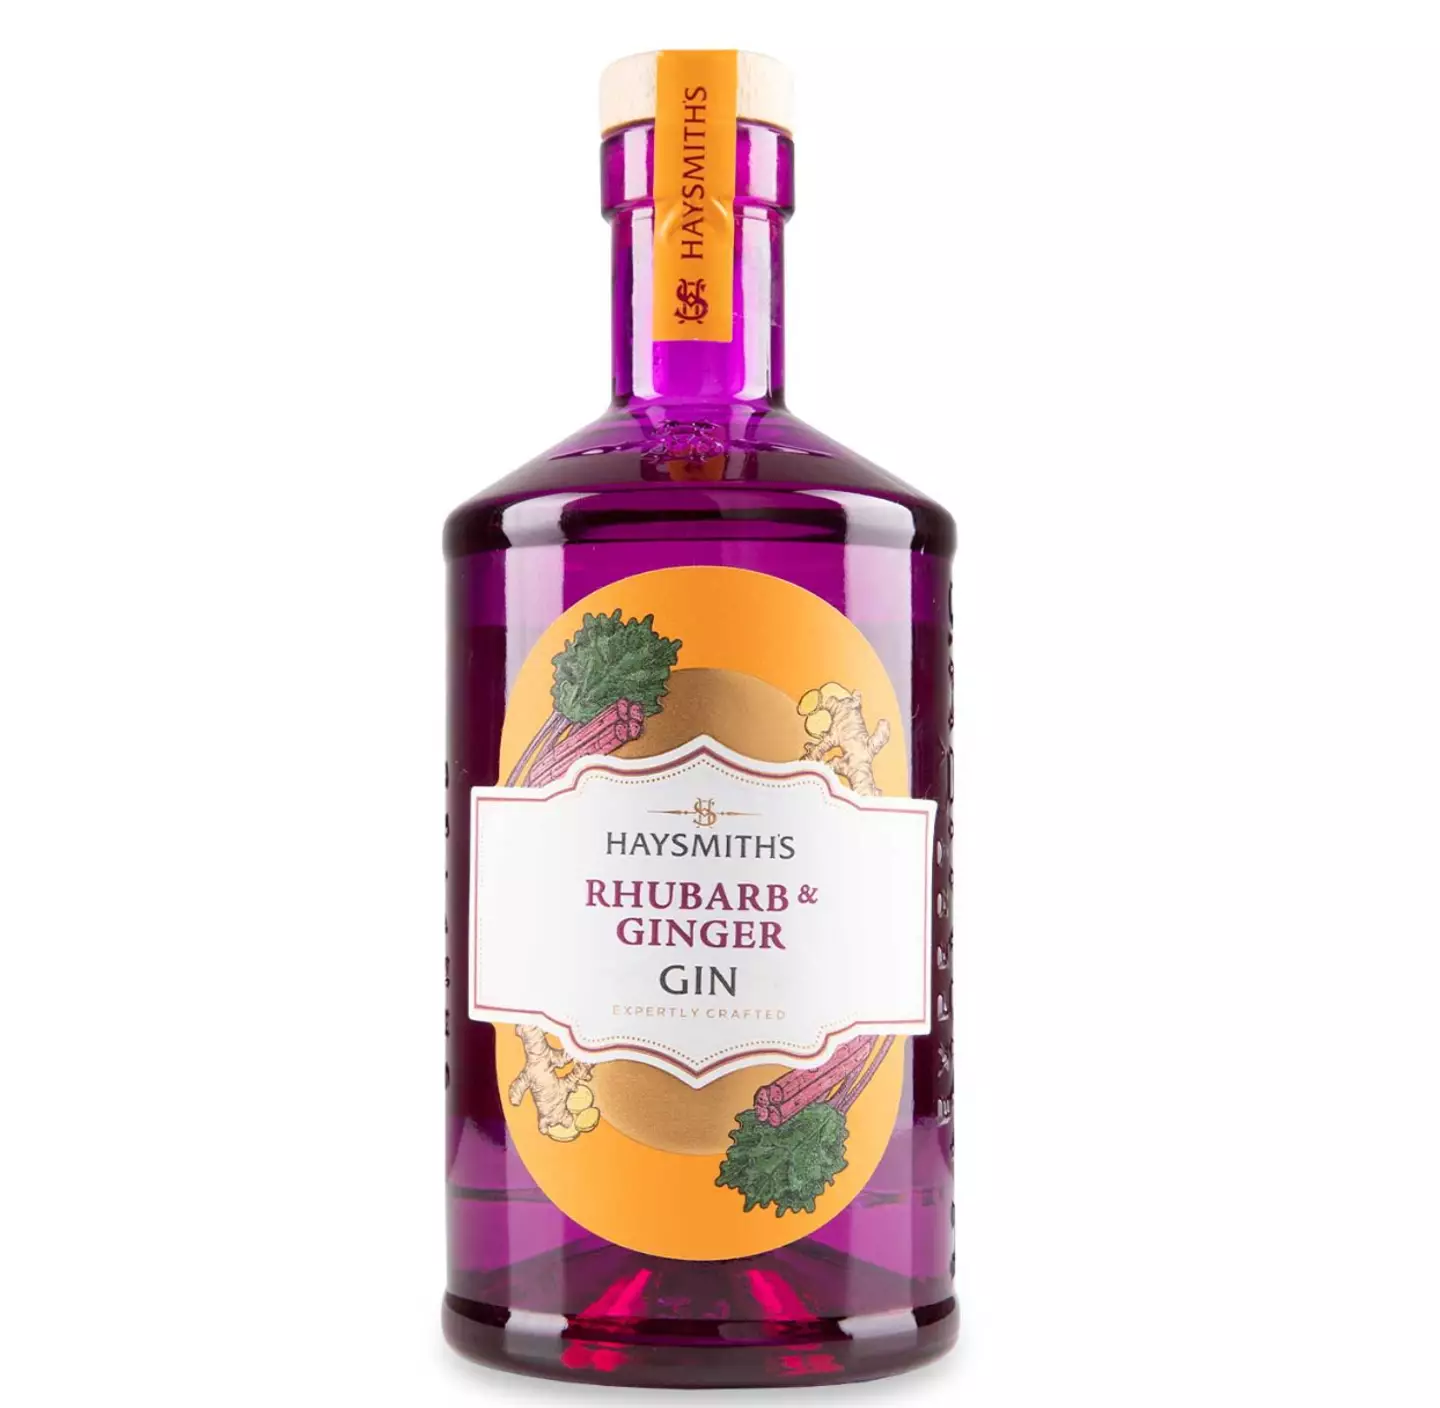 Aldi's Haysmith's Rhubarb & Ginger Gin won a gold medal at the competition.